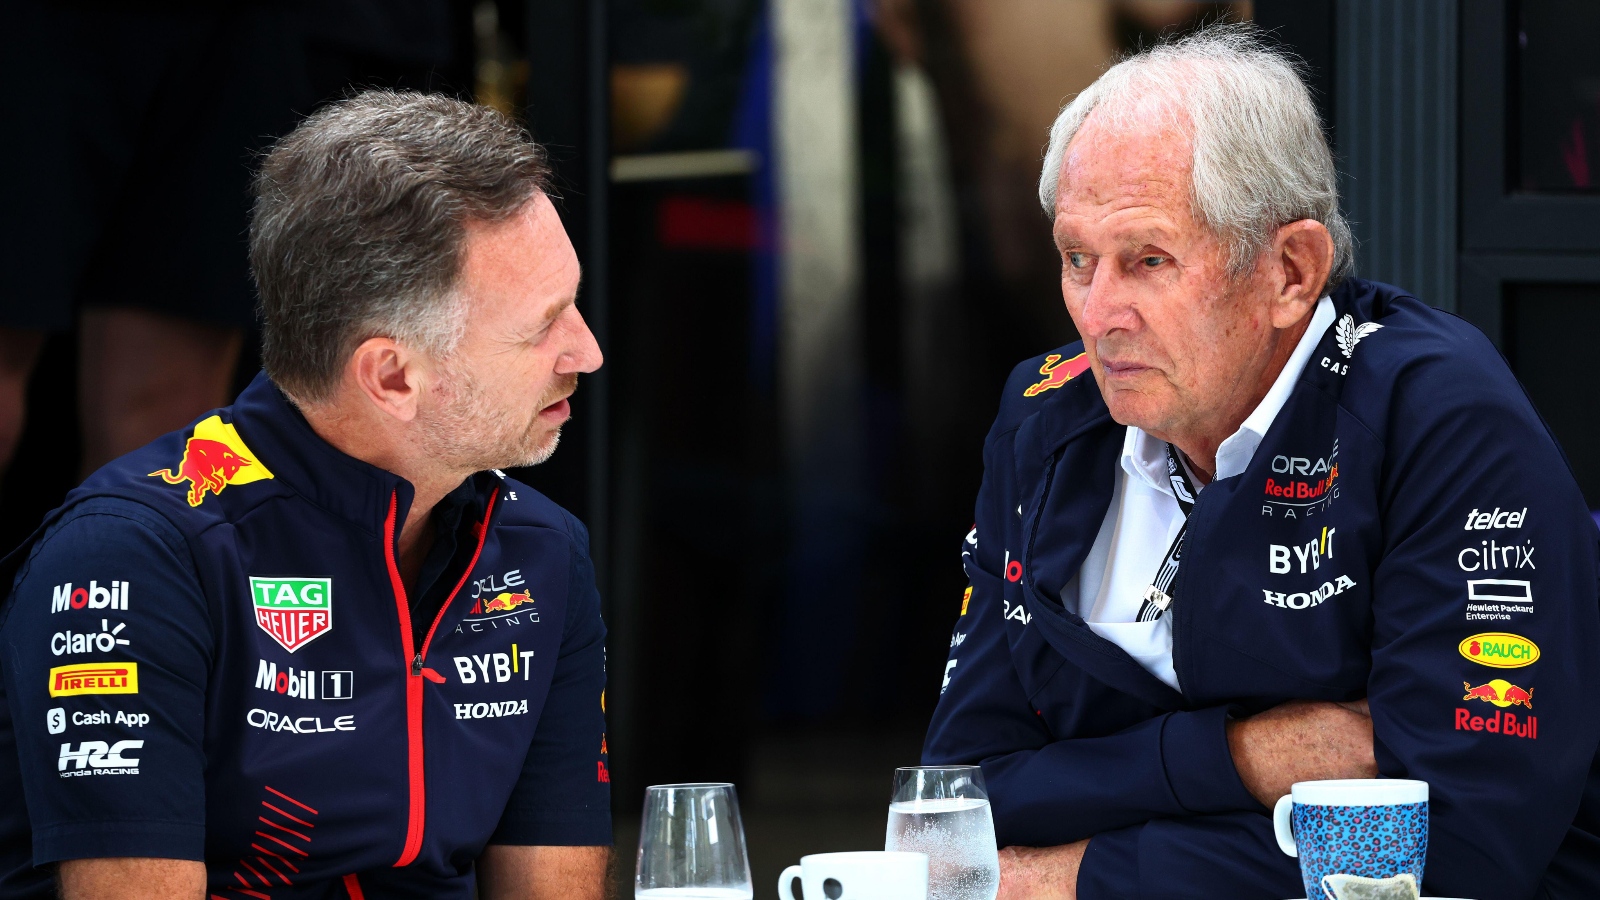 F1 rumours: Christian Horner wants Helmut Marko out of Red Bull : PlanetF1